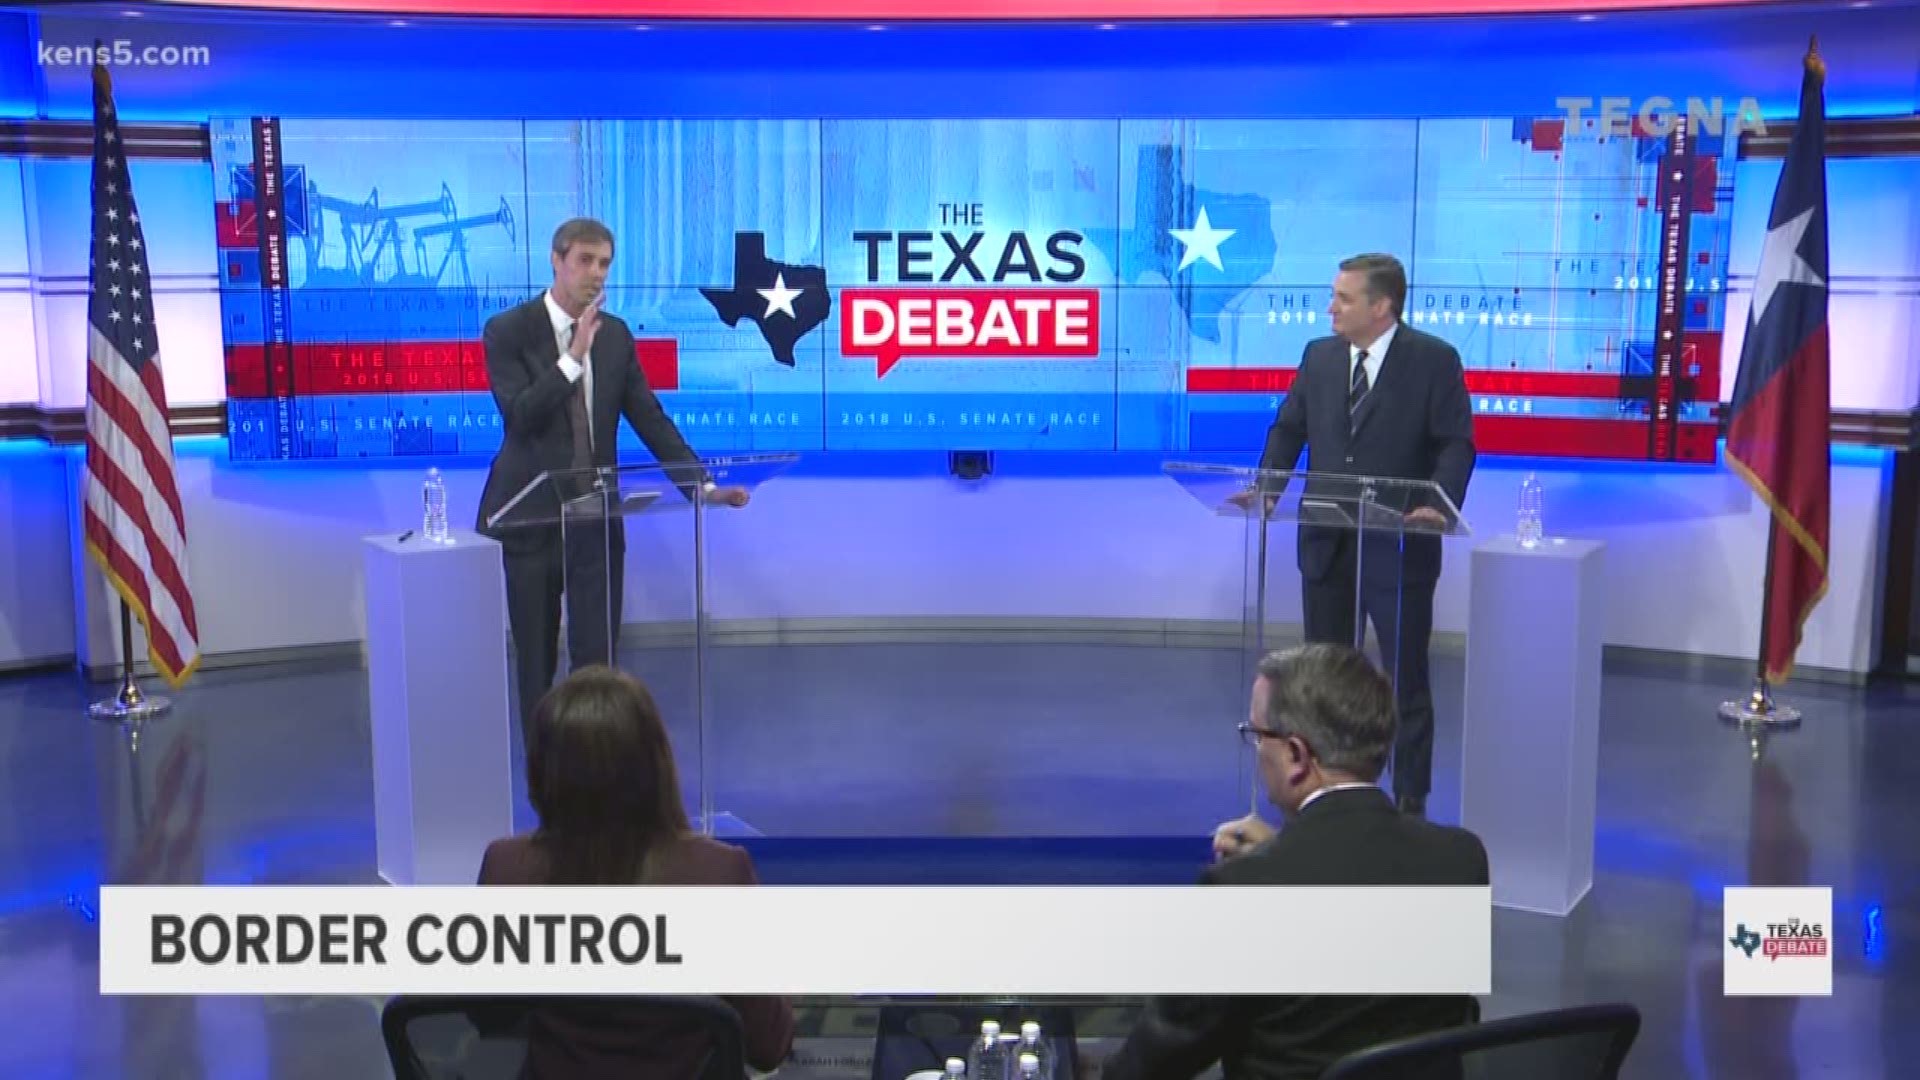 Candidate Beto O'Rourke says that of the 98 U.S. senators that voted to move forward on legislation regarding immigrant children, Sen. Cruz was the only one that stood in the way.